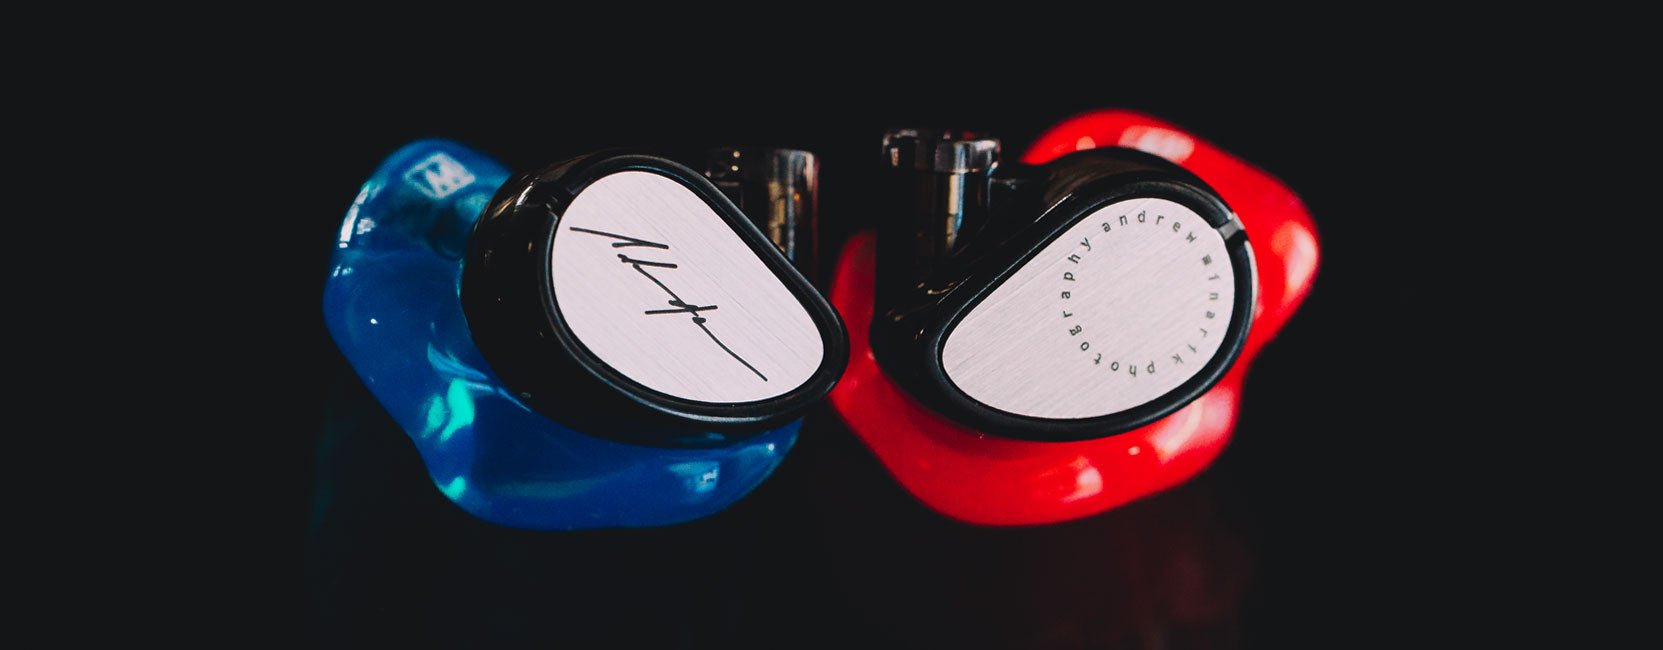 Two pairs of custom in-ear monitors, one in blue and one in red, both featuring distinctive logo designs on a reflective black surface.